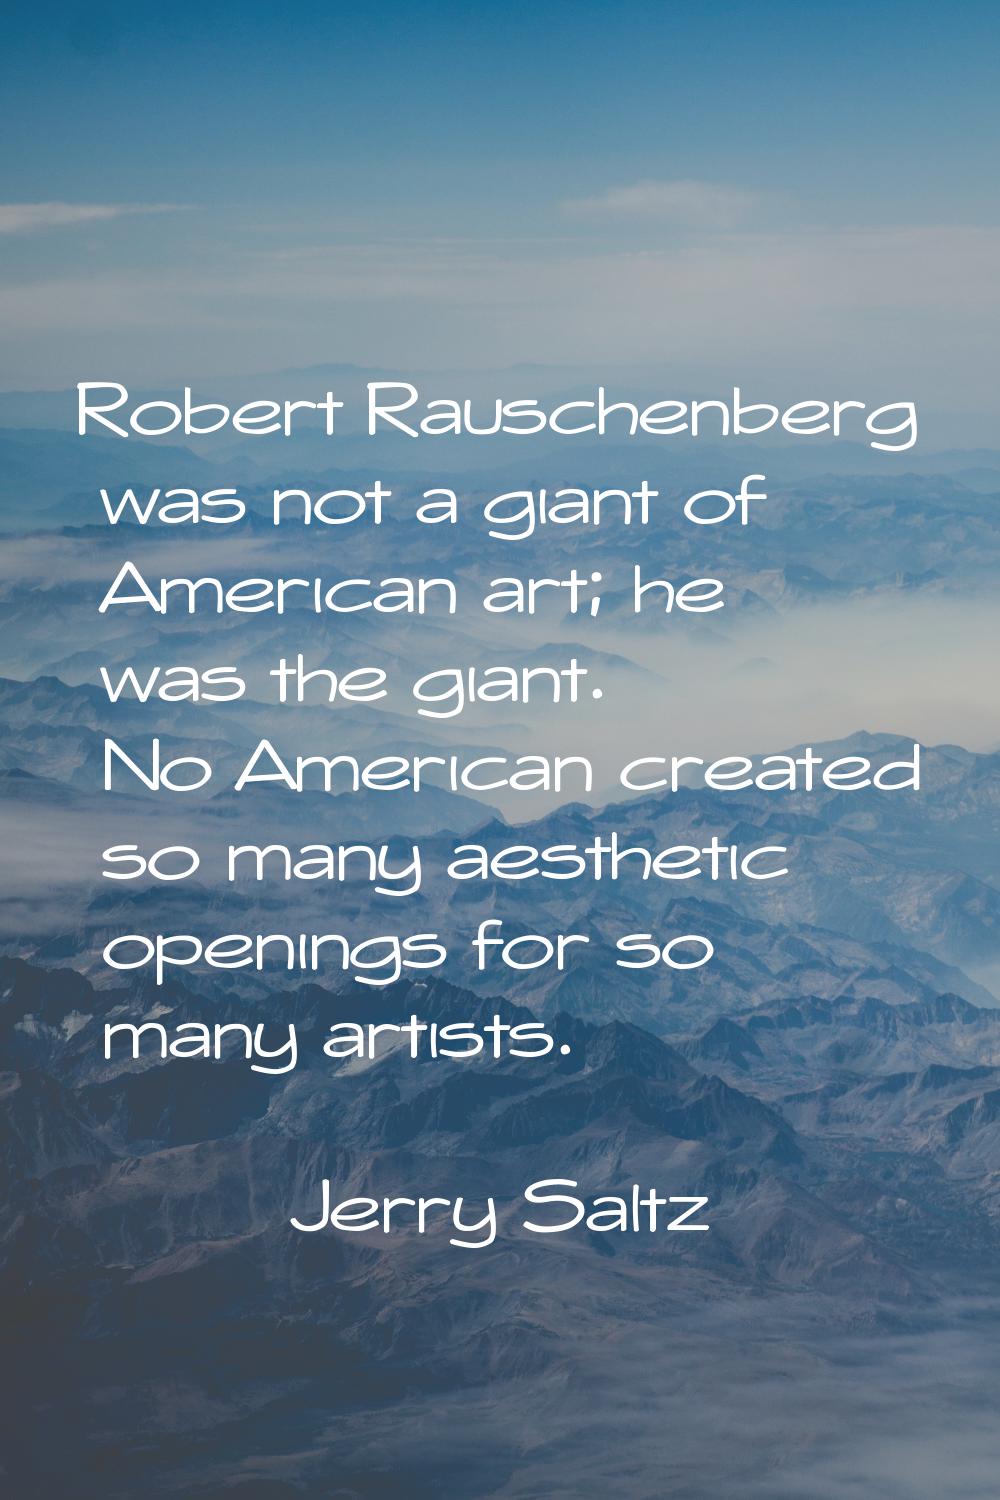 Robert Rauschenberg was not a giant of American art; he was the giant. No American created so many 